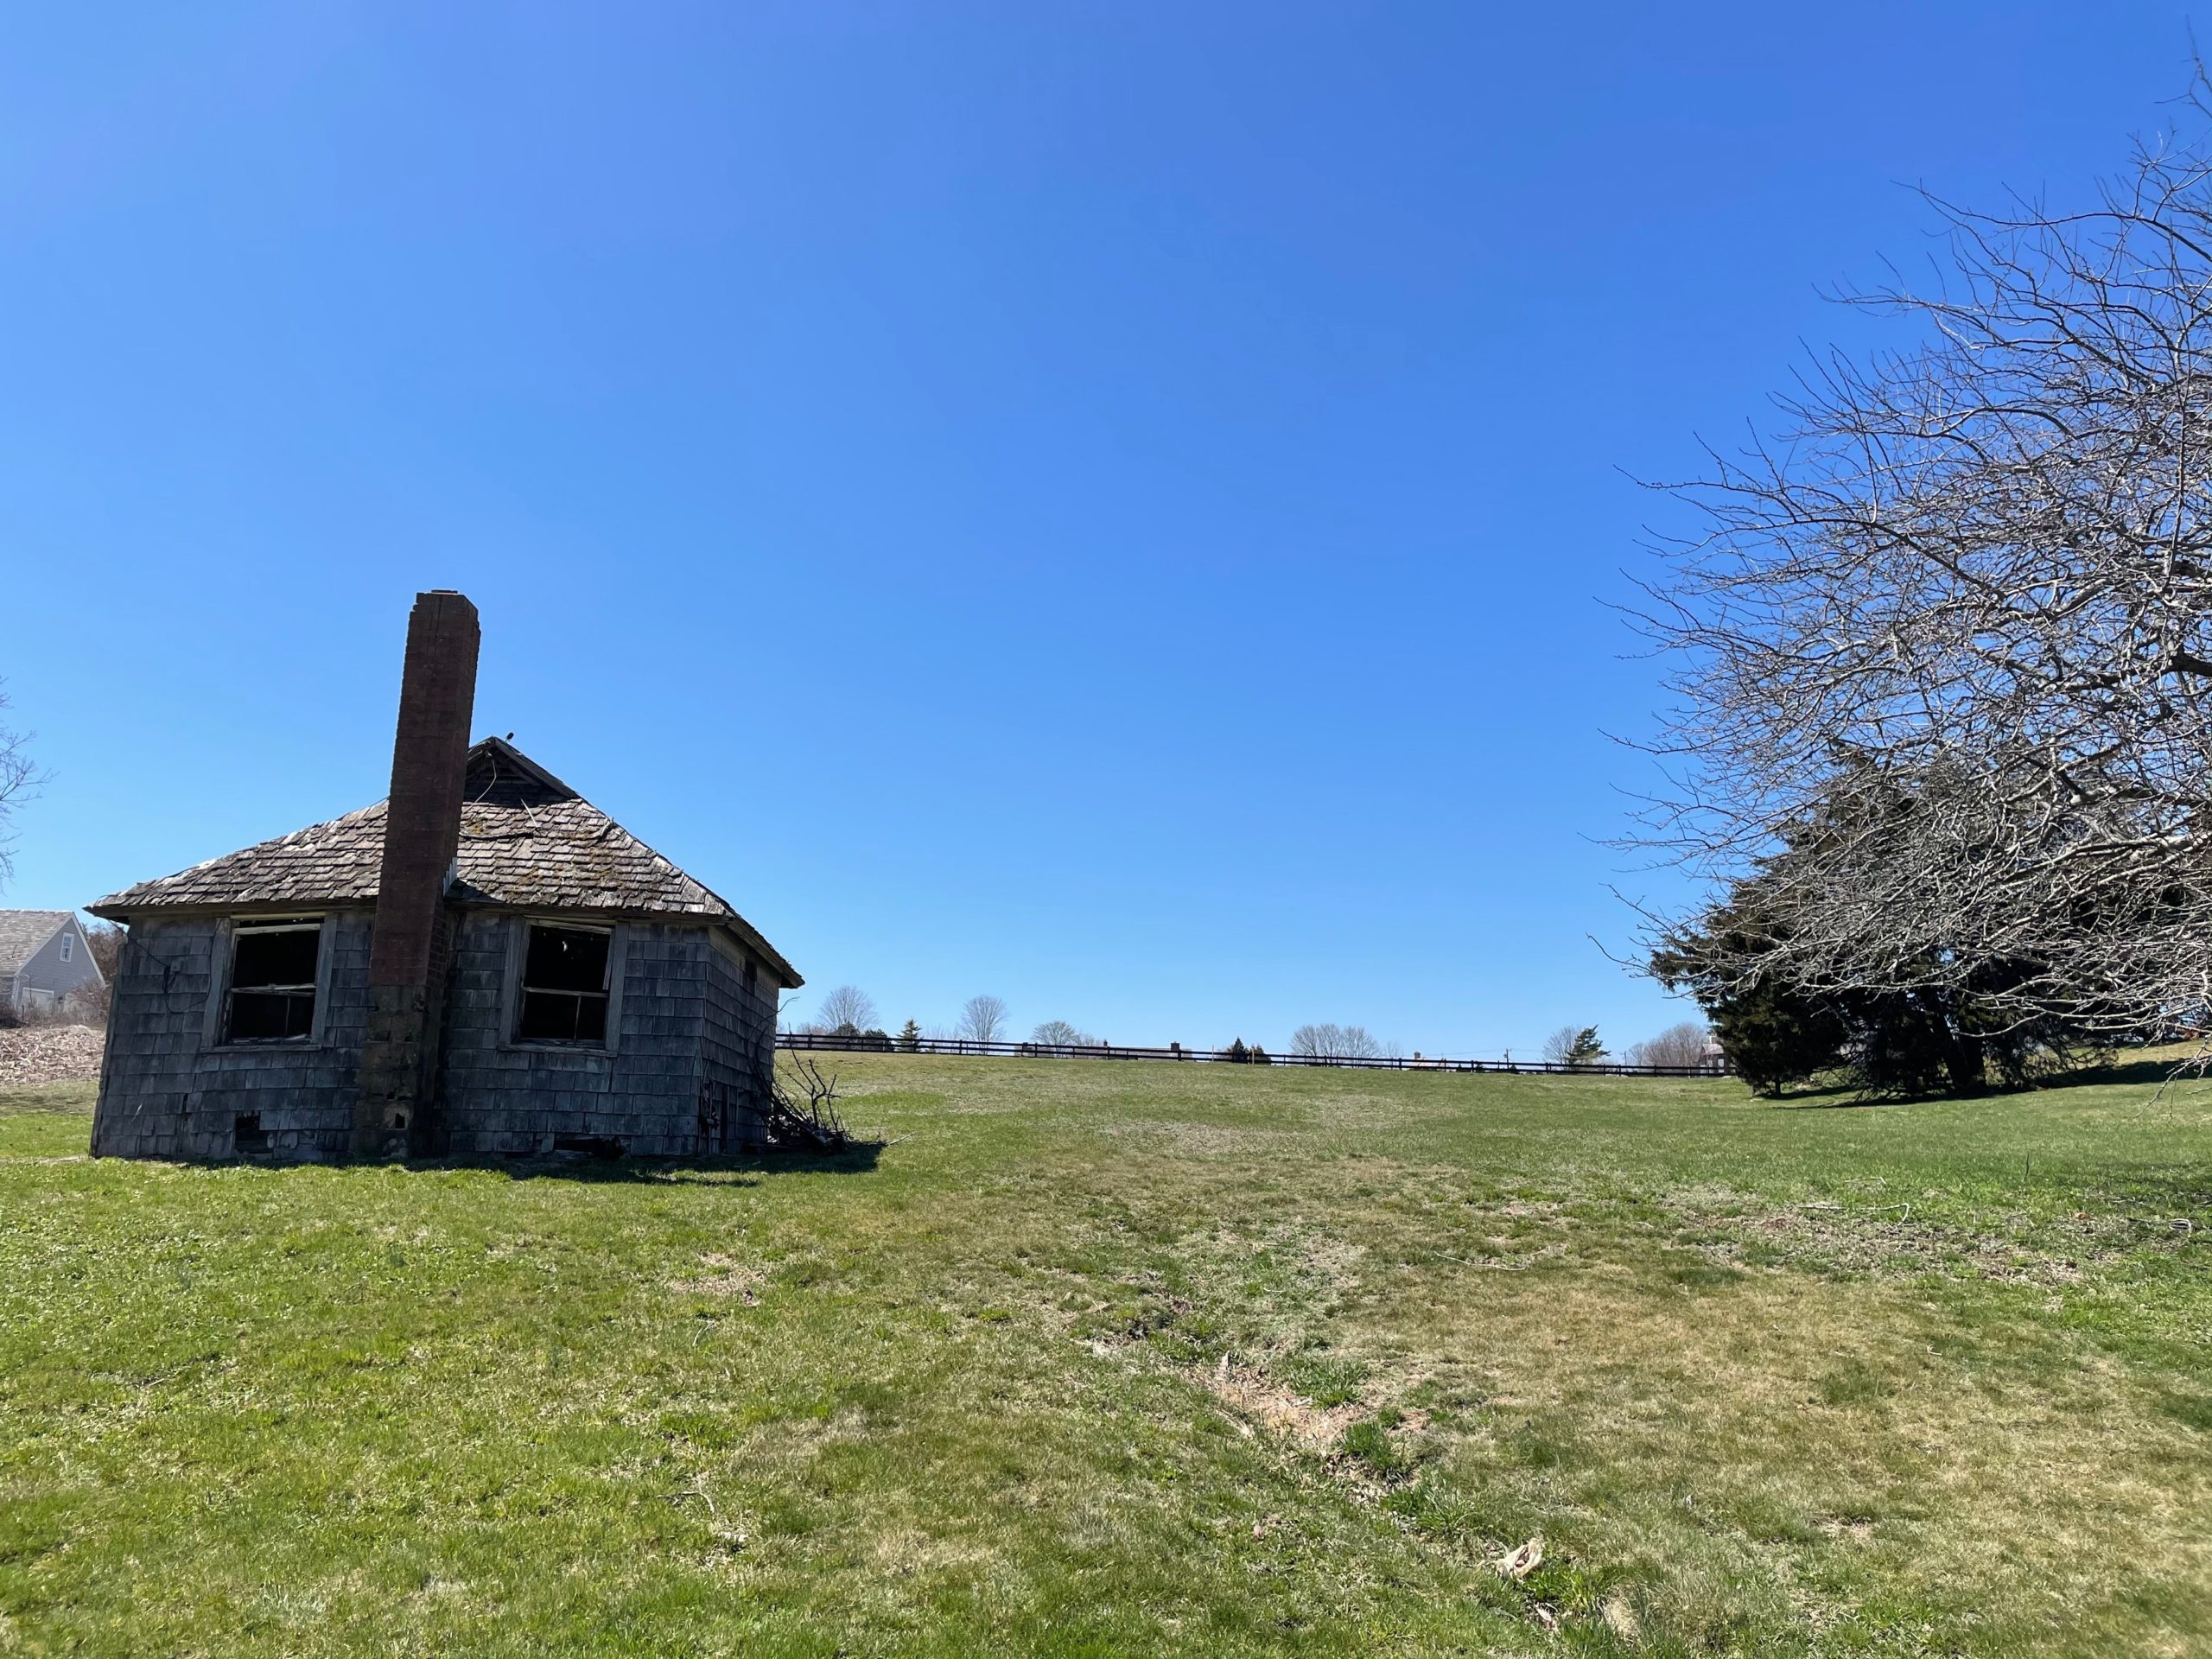 'The Little House' was home to migrant workers and farmhands in Wainscott for a century. It will be demolished in May by developers if it is not relocated to a new property.